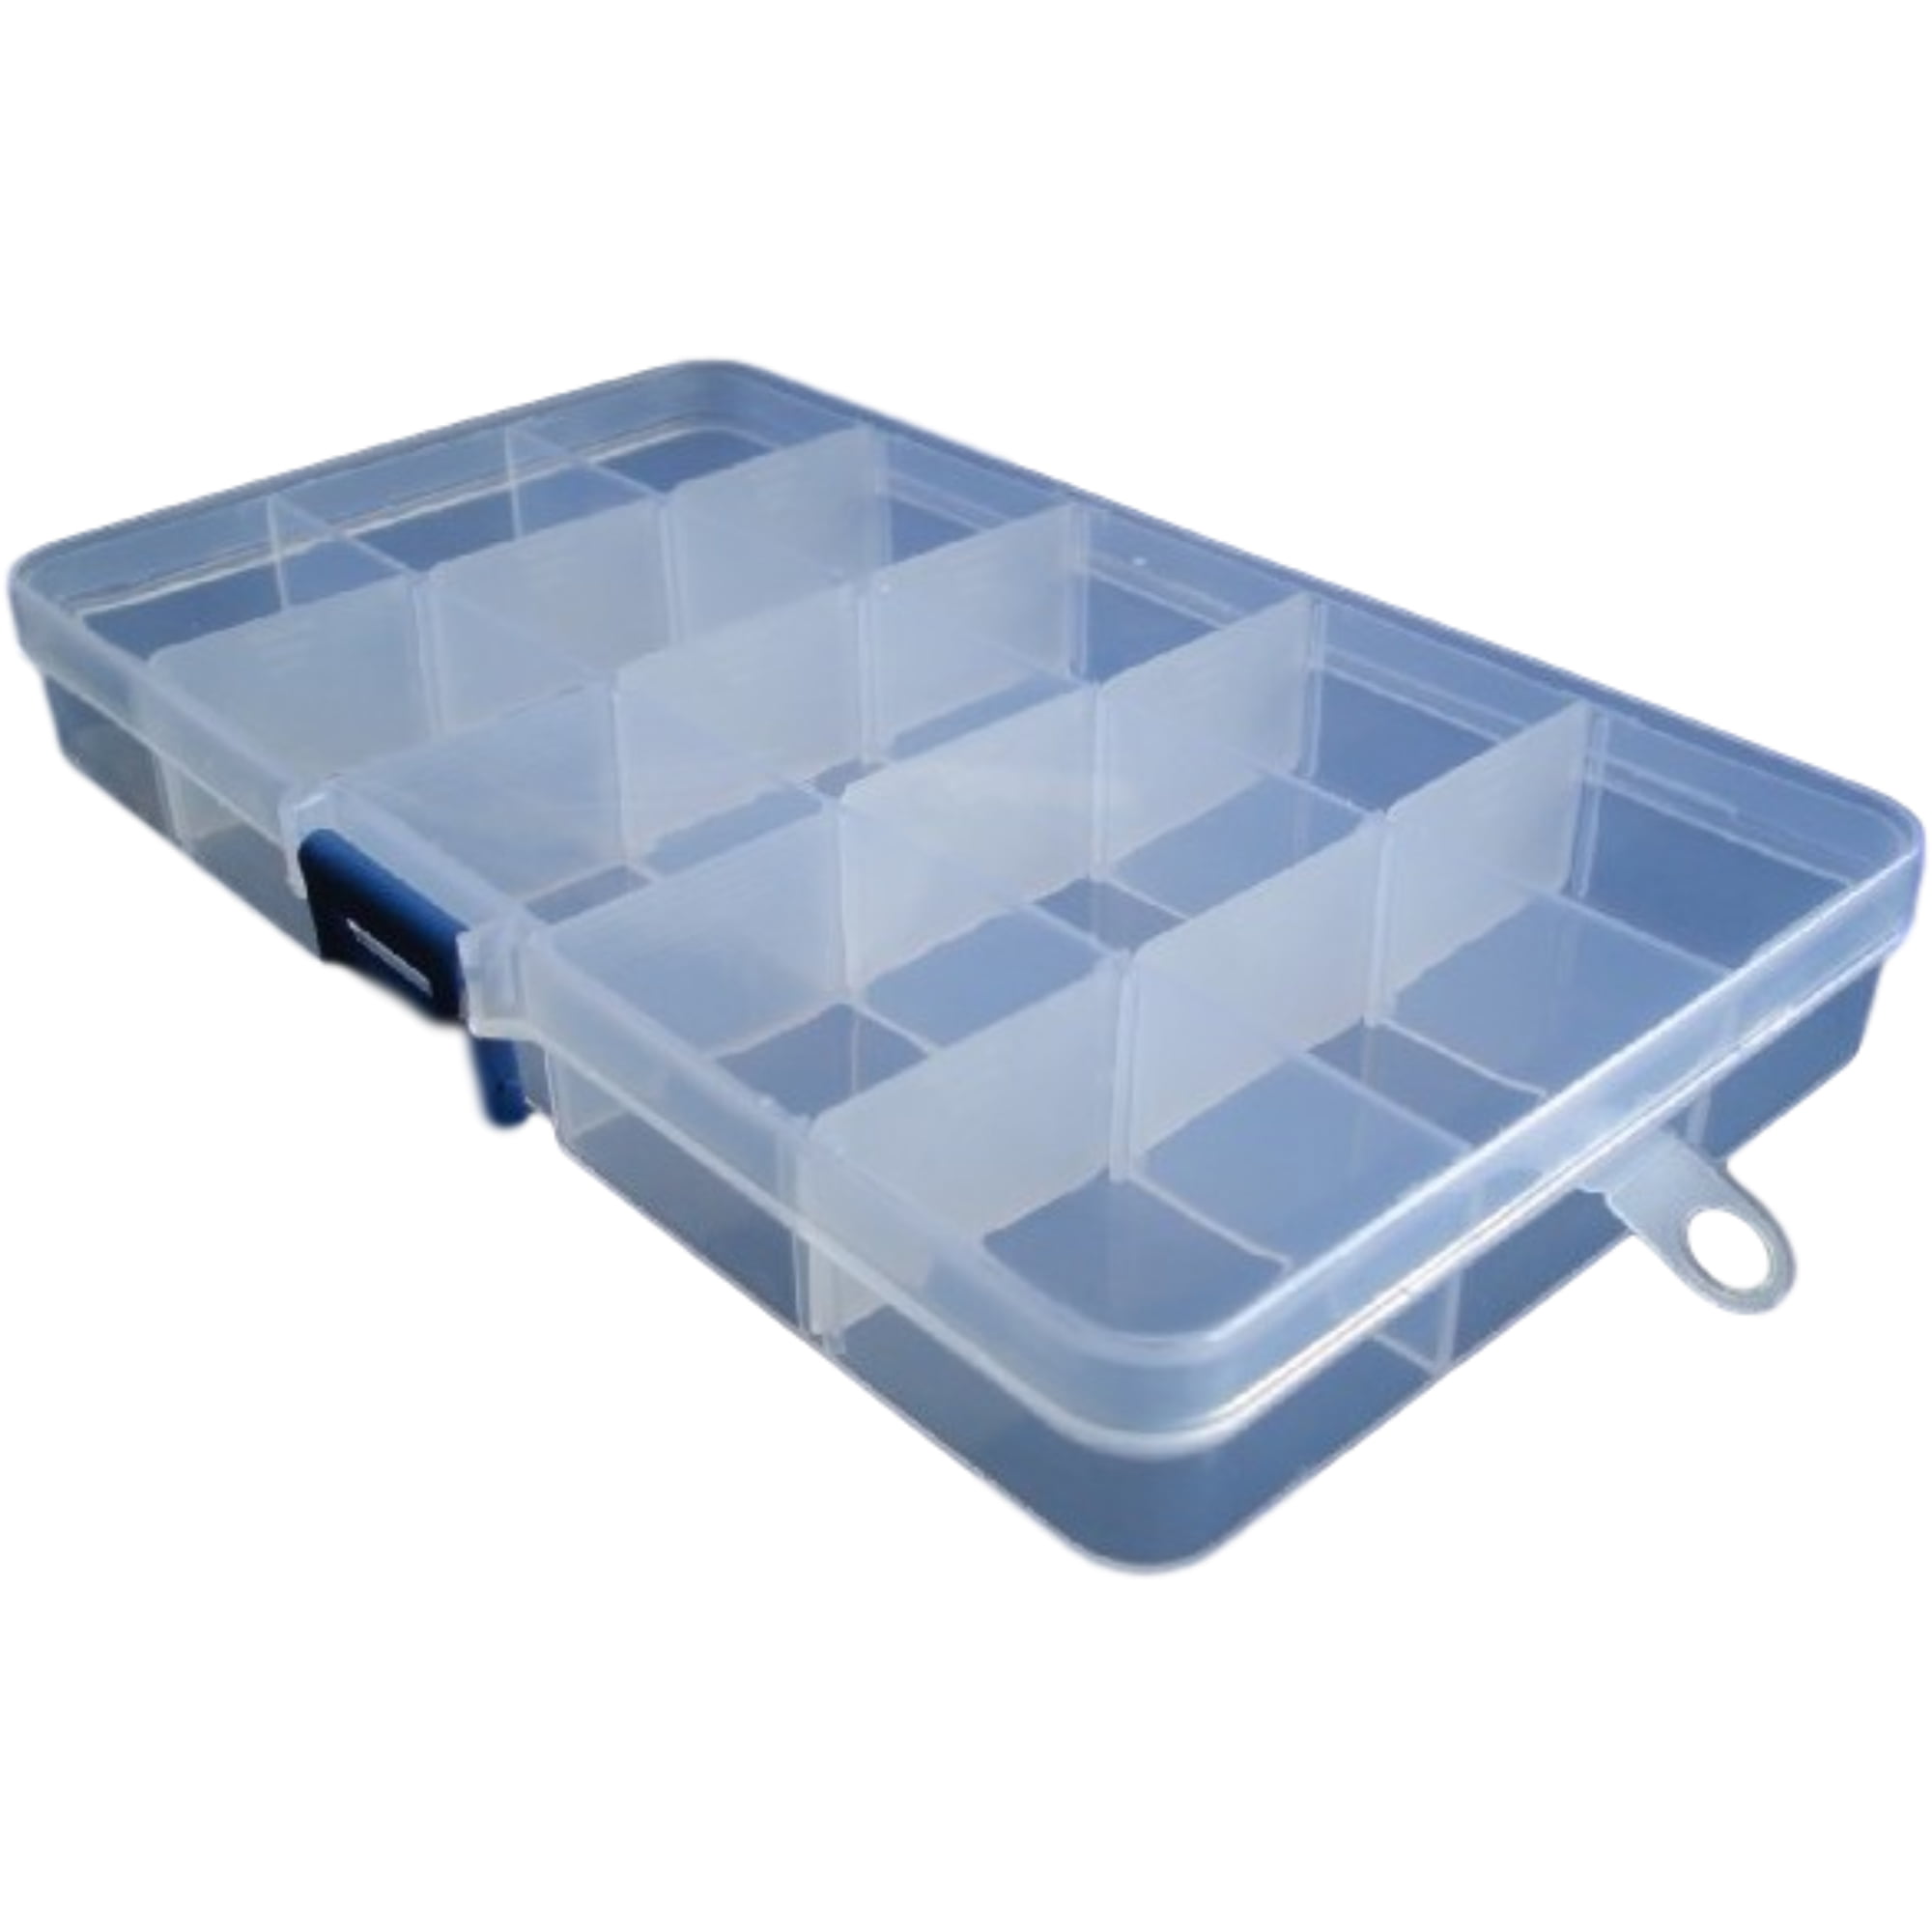 15 Slots Compartments Plastic Box Jewelry Bead Storage Container Craft Organizer 